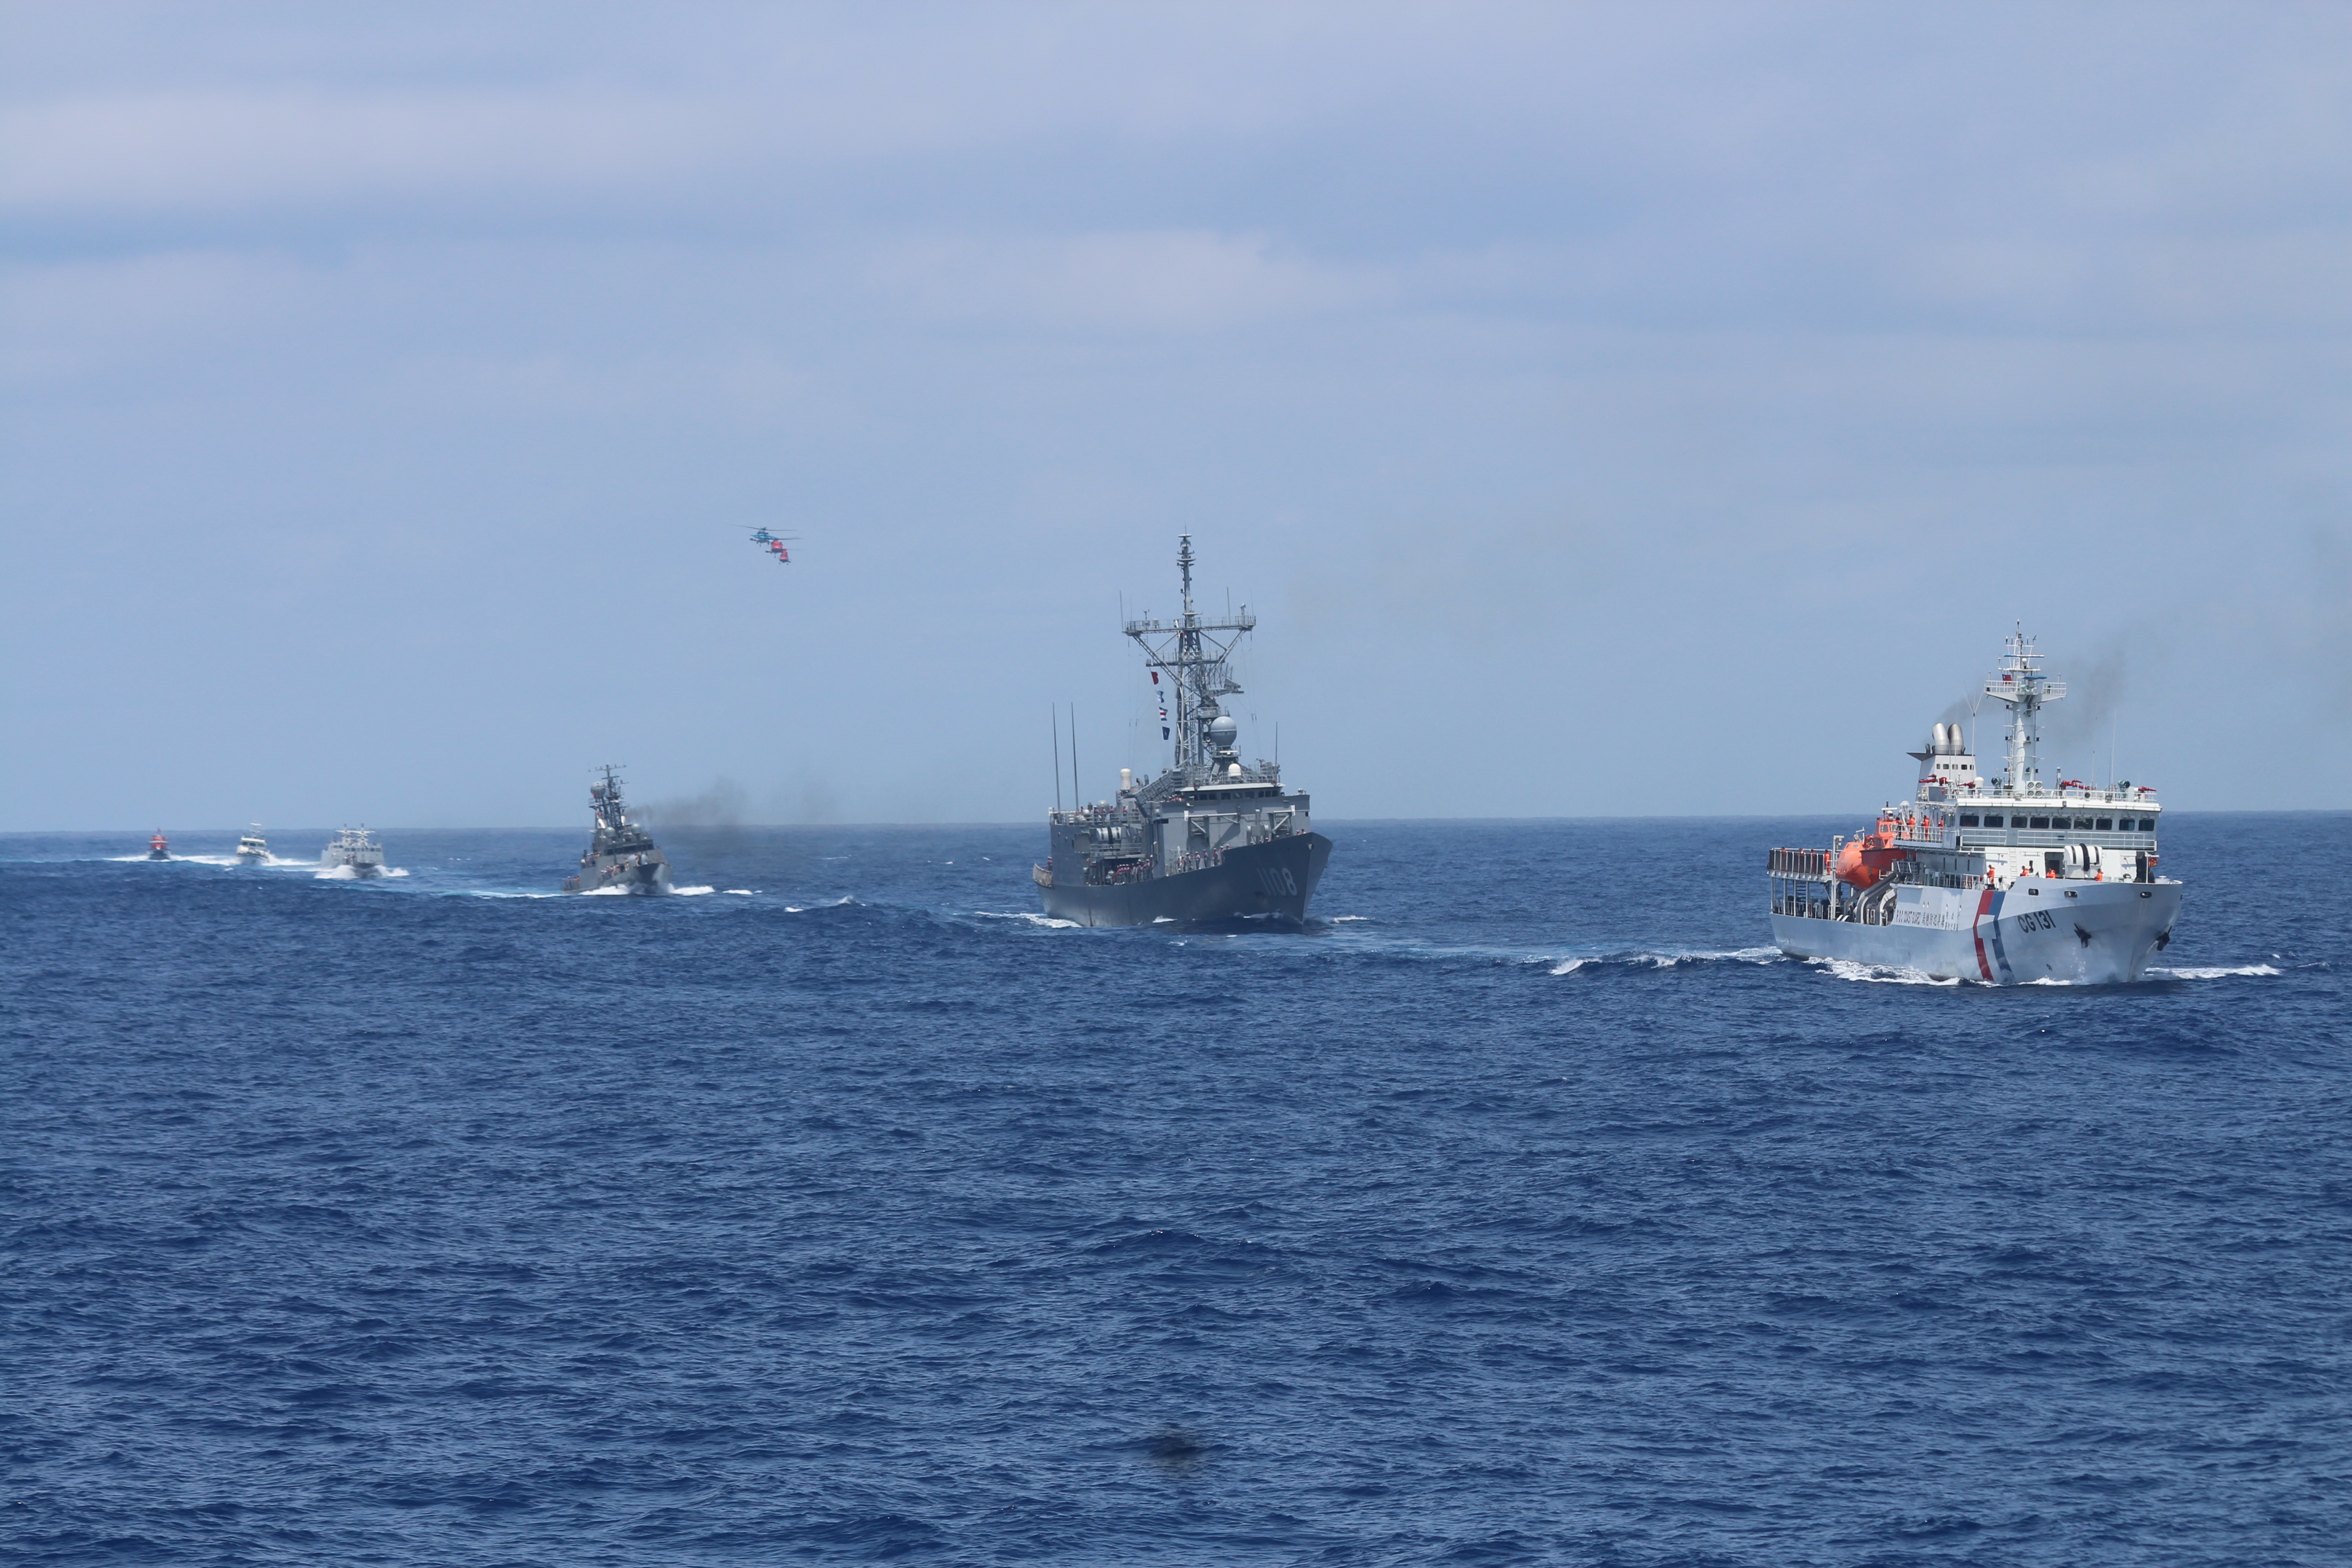 Coast Guard and the Department of Defense held a joint fishing protection and air and sea search and rescue drill